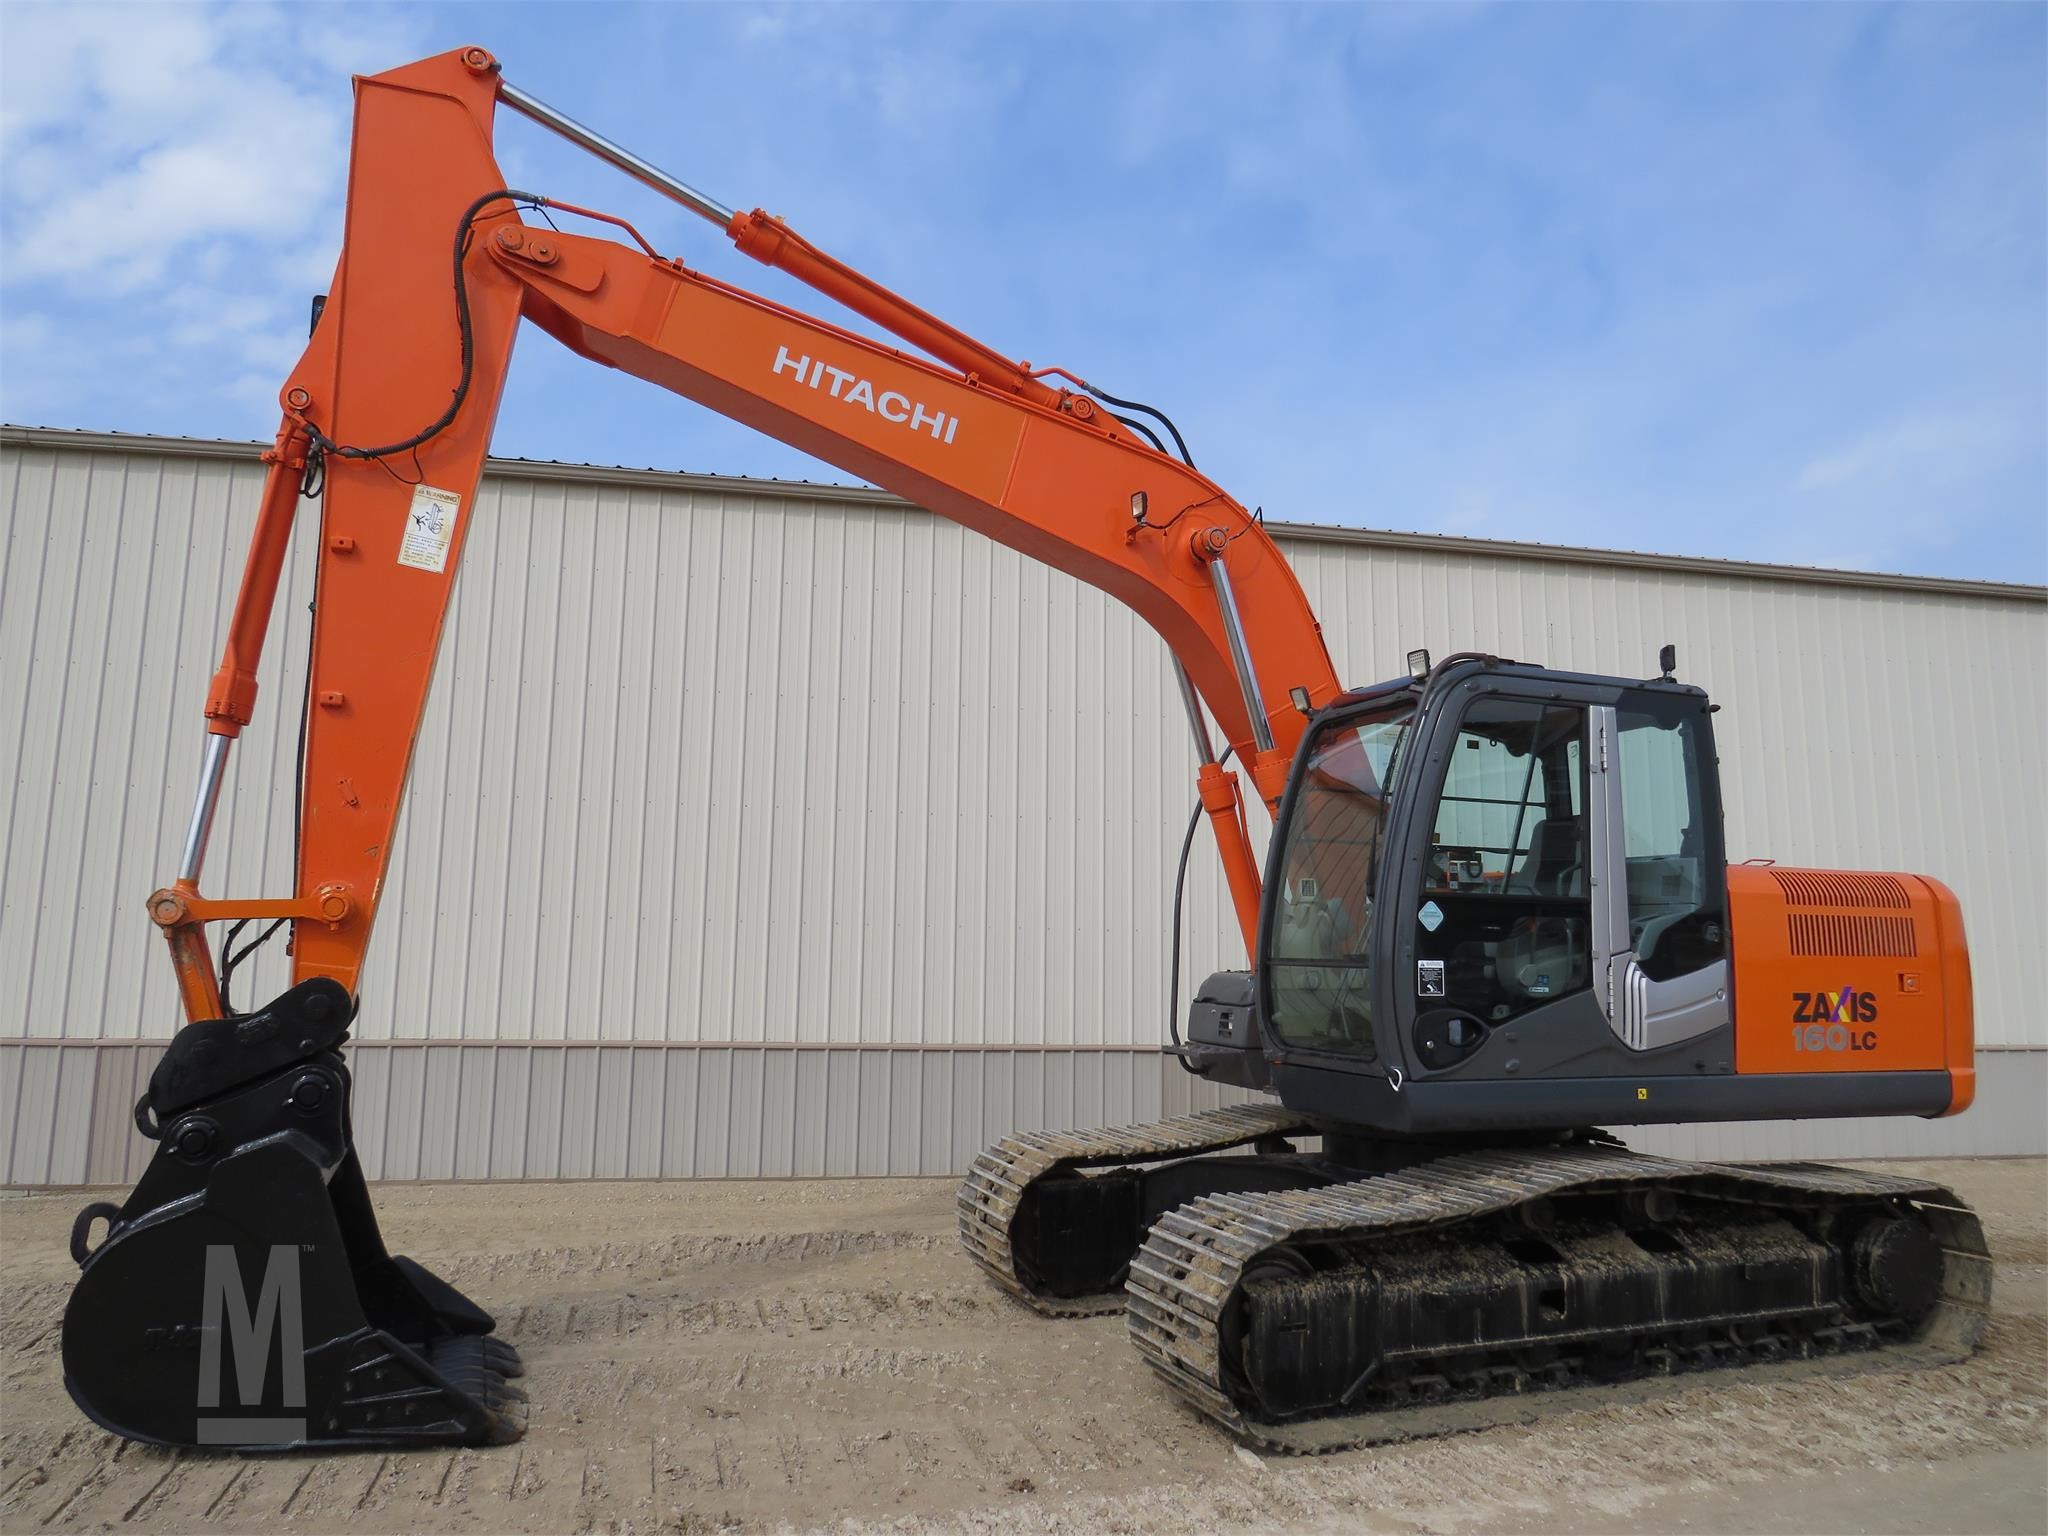 HITACHI ZX160 For Sale - 36 Listings | MarketBook.ca - Page 1 of 2